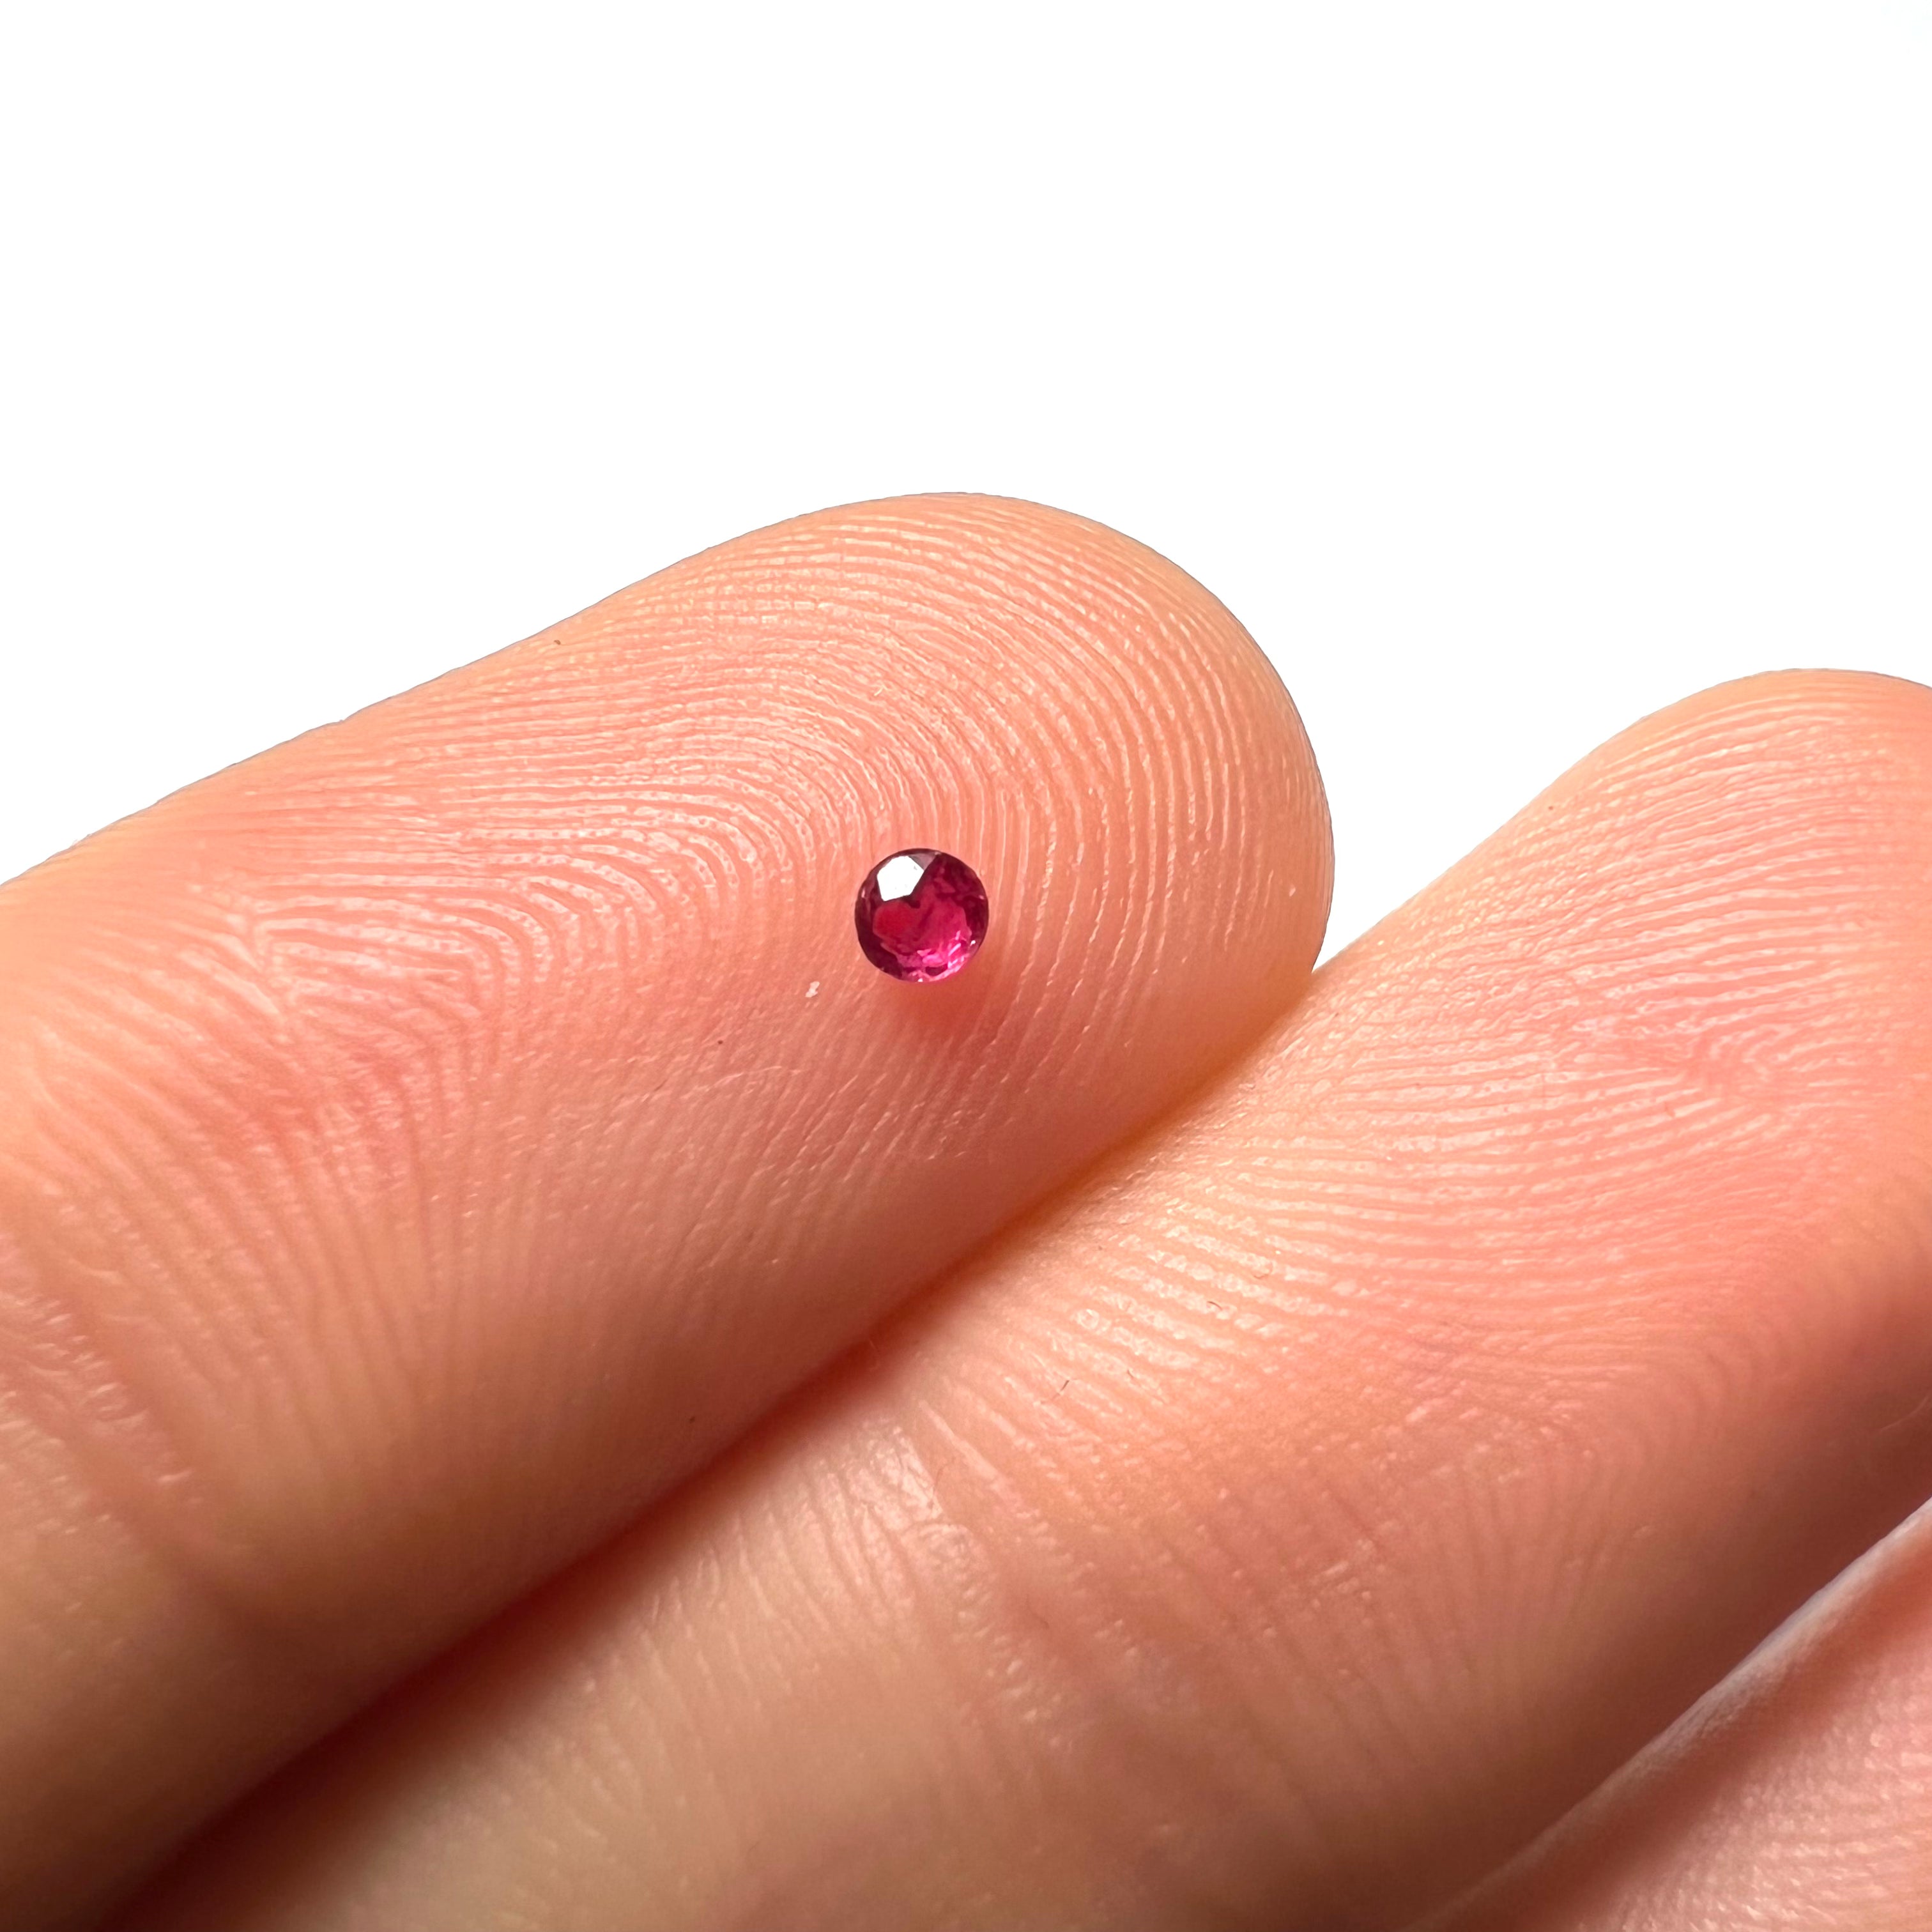 .06CT Loose Natural  Ruby 2.1mm Earth mined Gemstone